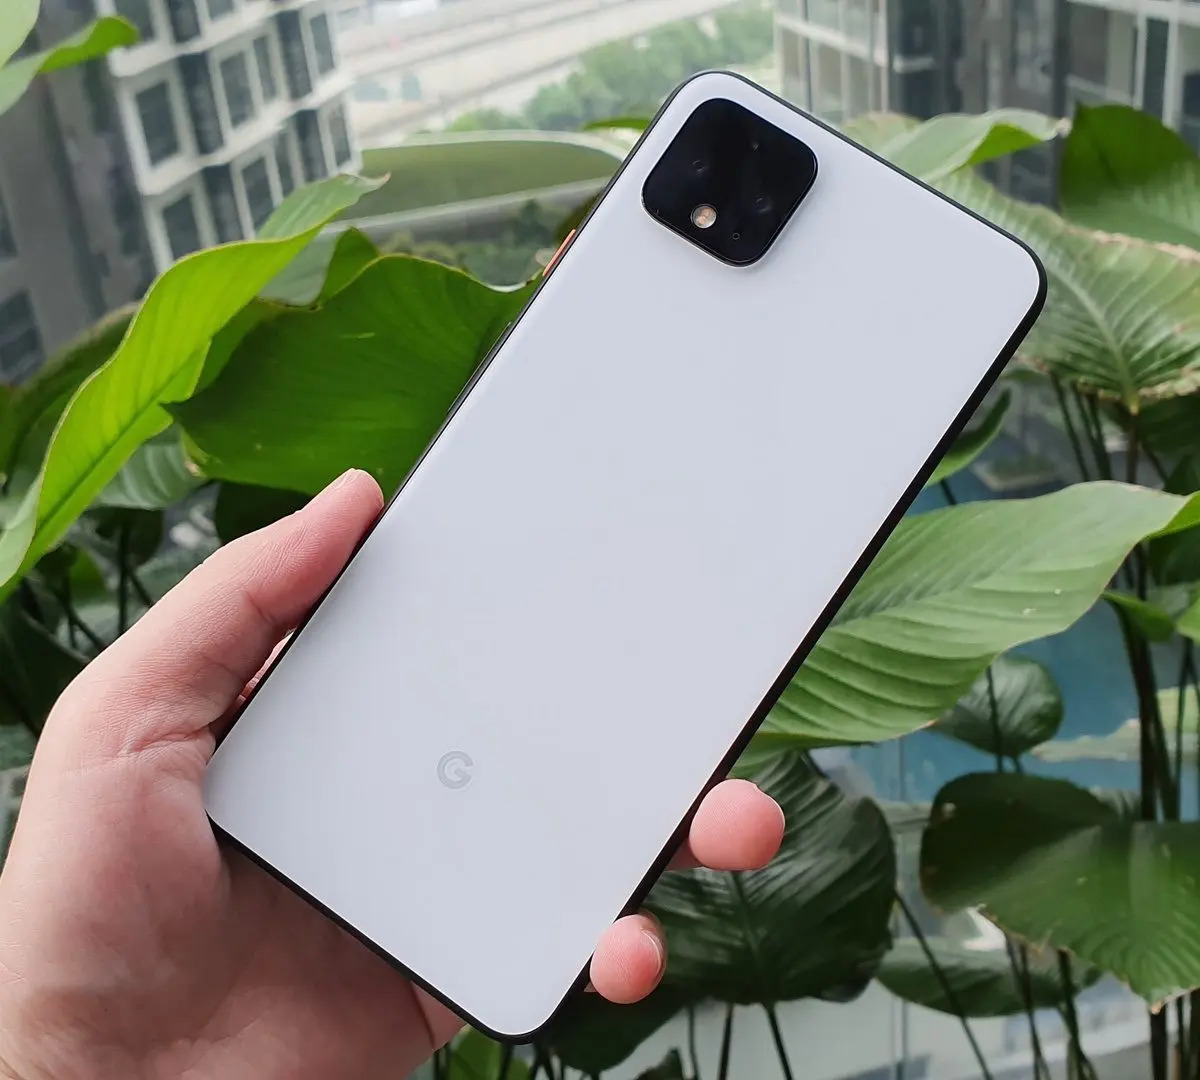 google-has-officially-stopped-selling-the-original-google-pixel